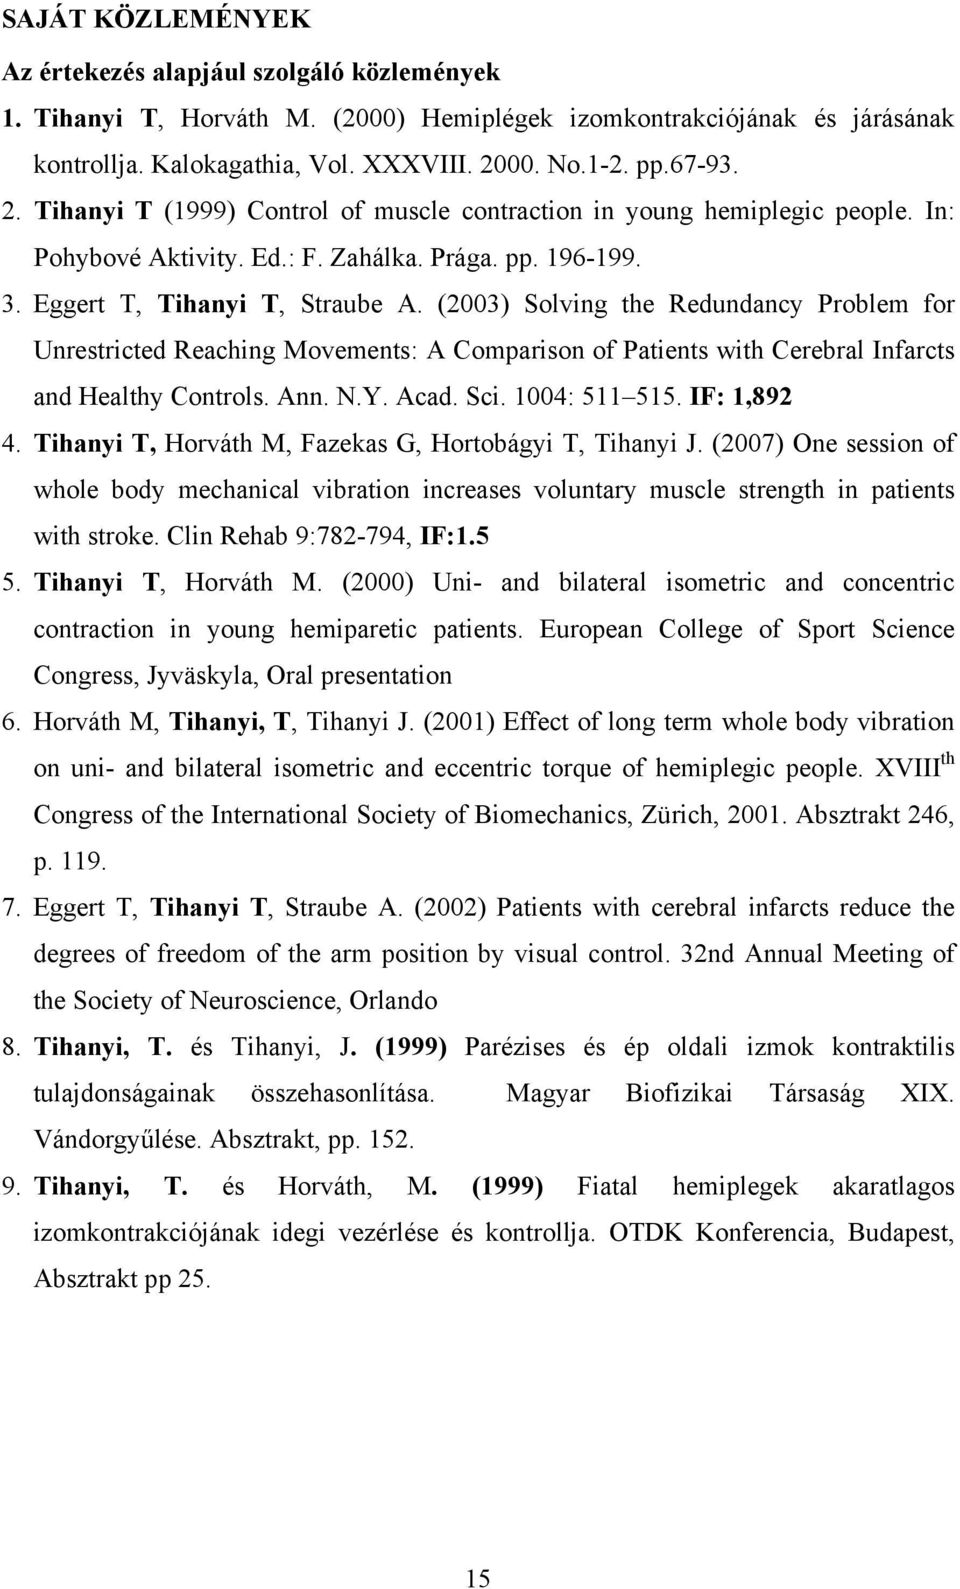 (2003) Solving the Redundancy Problem for Unrestricted Reaching Movements: A Comparison of Patients with Cerebral Infarcts and Healthy Controls. Ann. N.Y. Acad. Sci. 1004: 511 515. IF: 1,892 4.